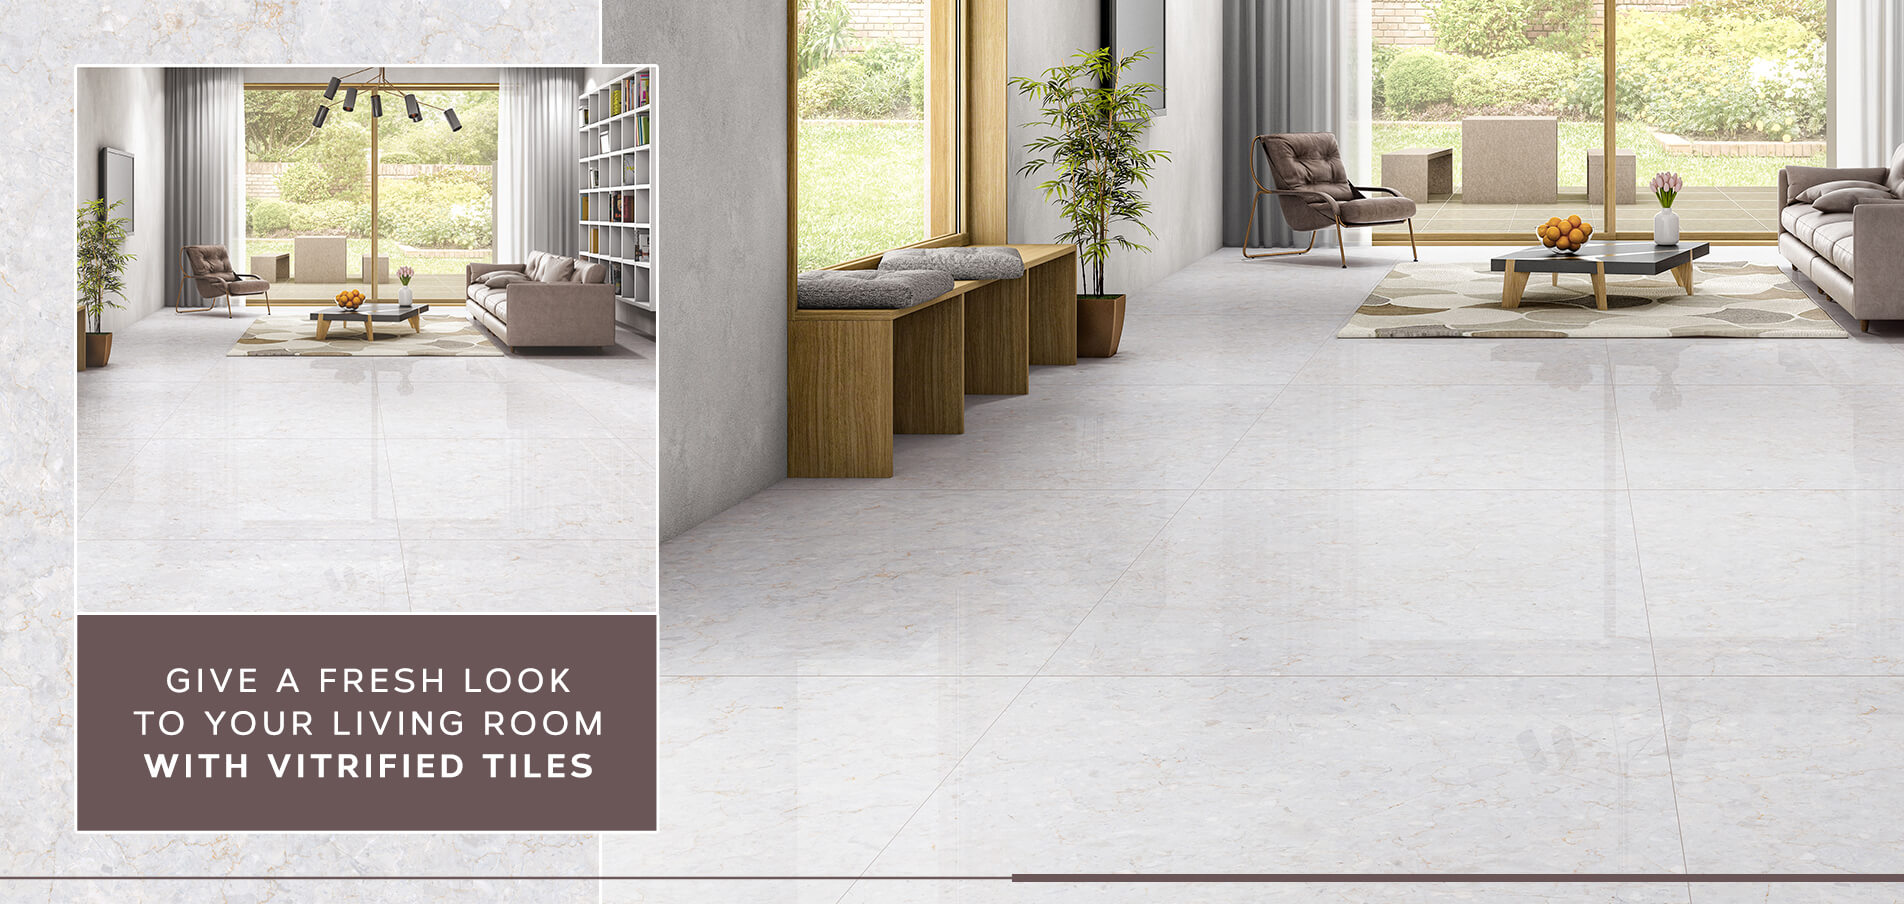 Give Your Living Room a Fresh Look with Vitrified Tiles